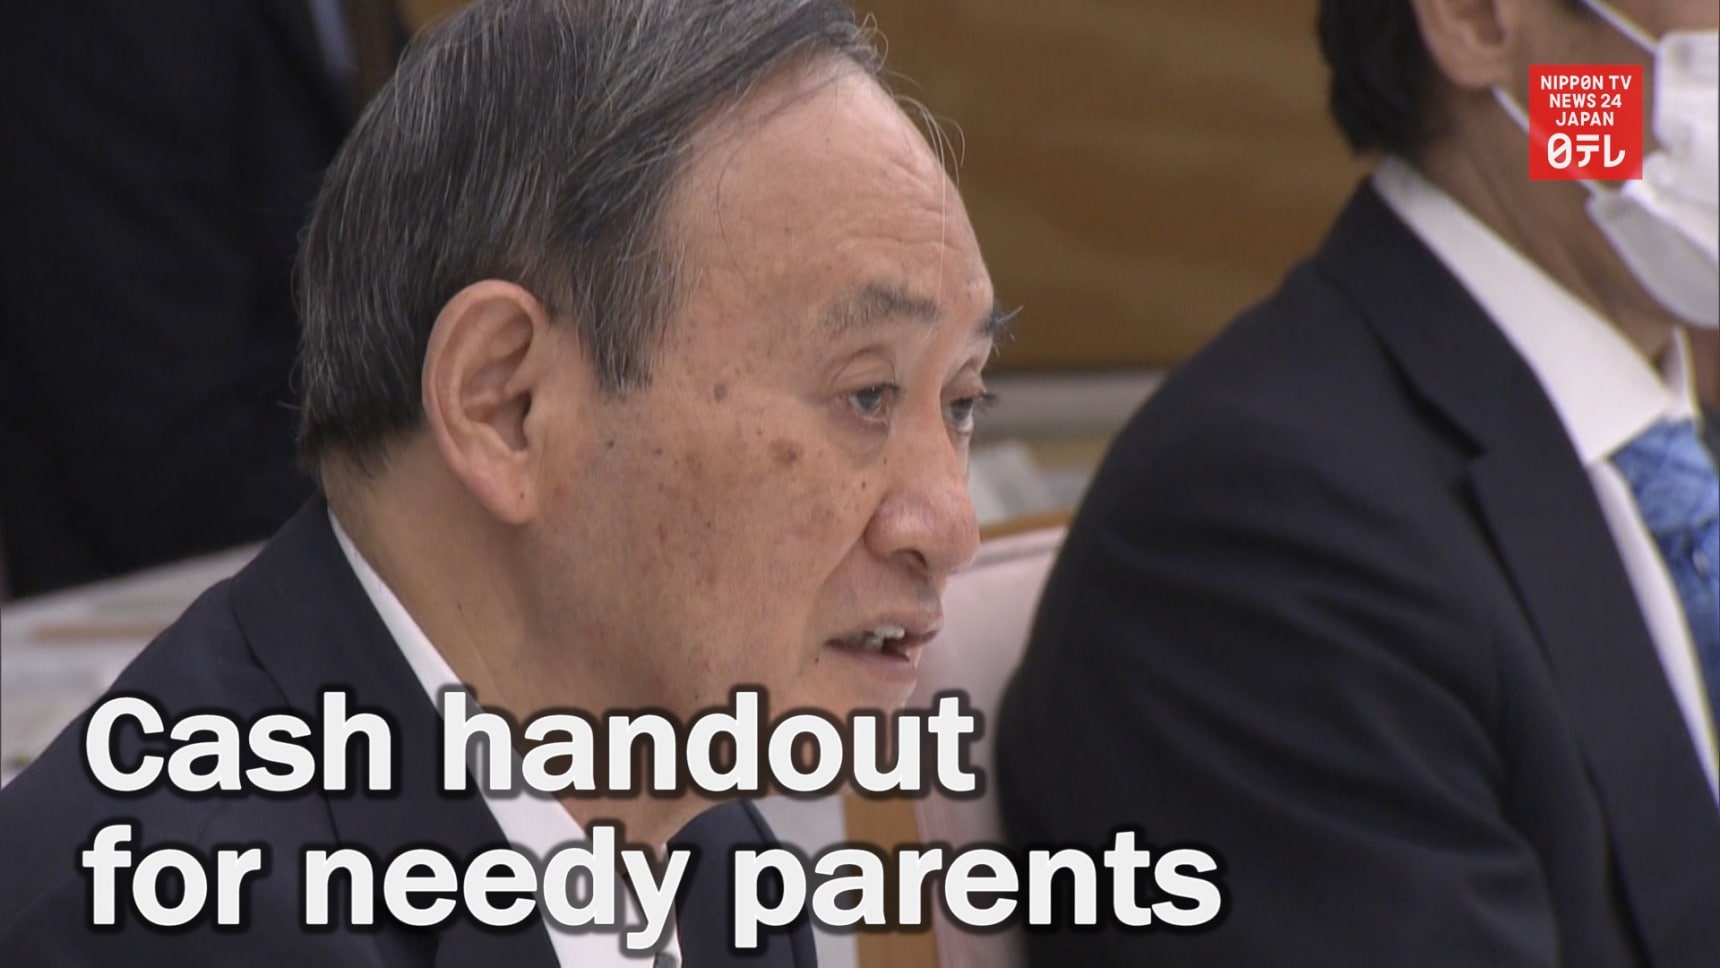 Japan to Provide ¥50,000 Handout to Parents